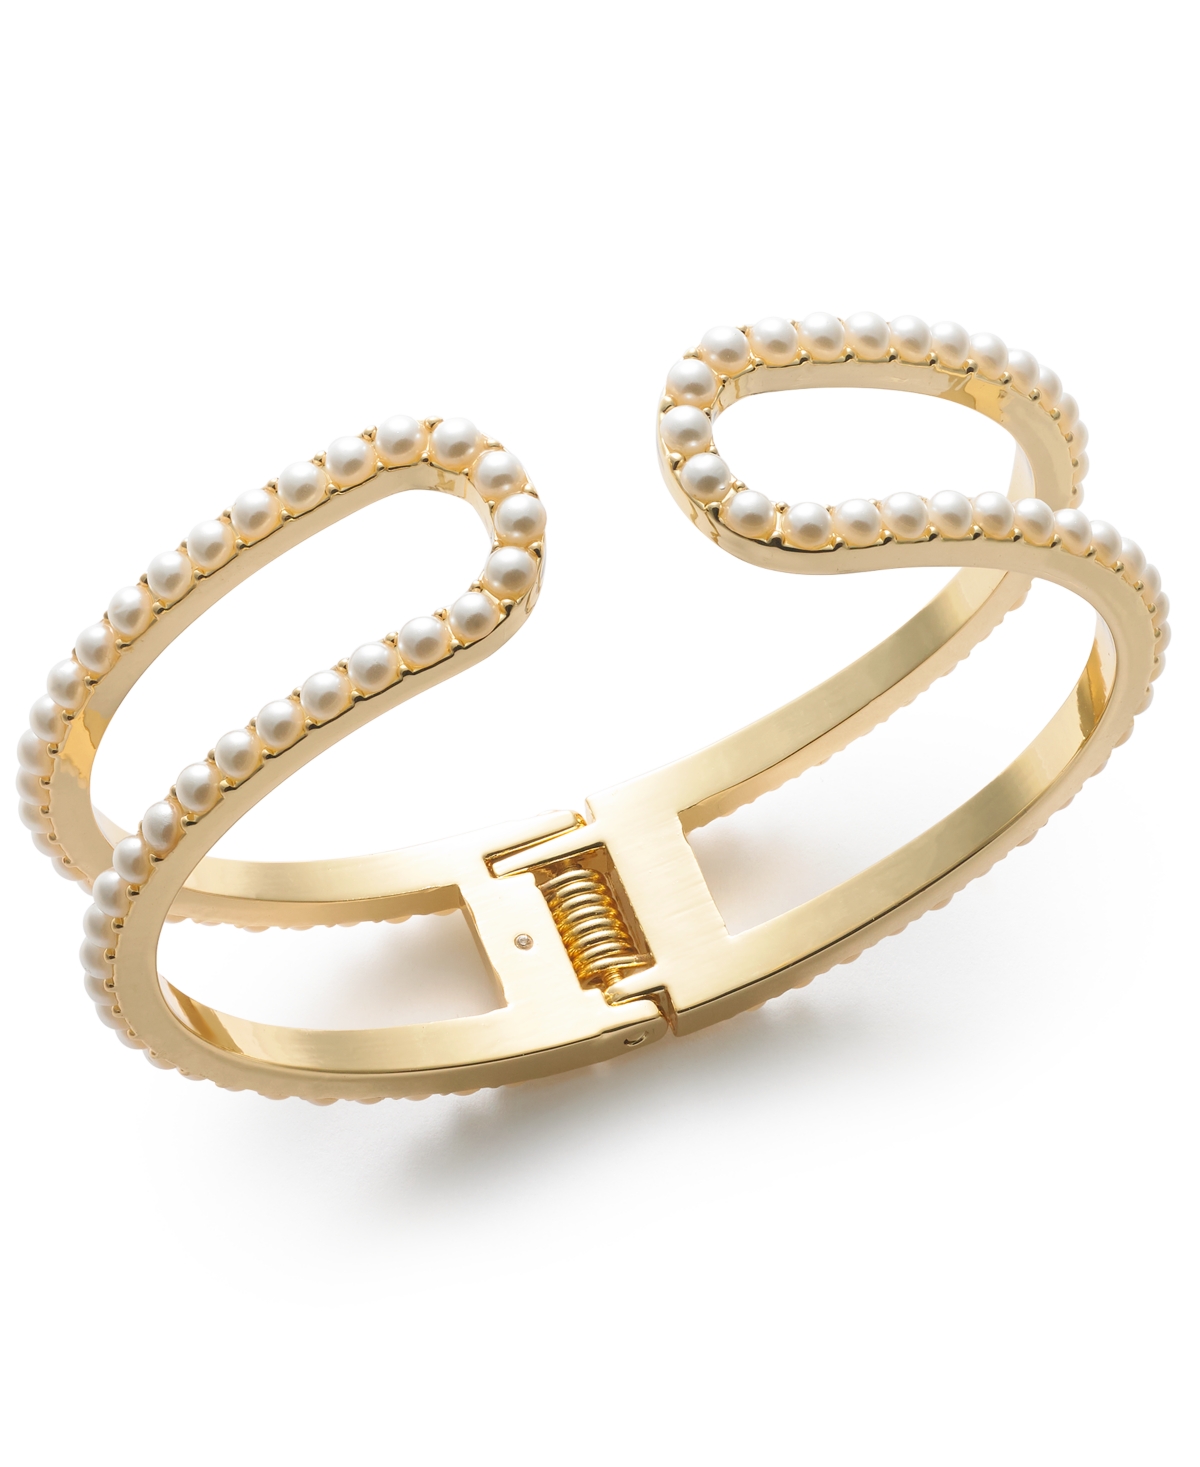 Gold-Tone Imitation Pearl Double-Row Cuff Bracelet, Created for Macy's - Gold